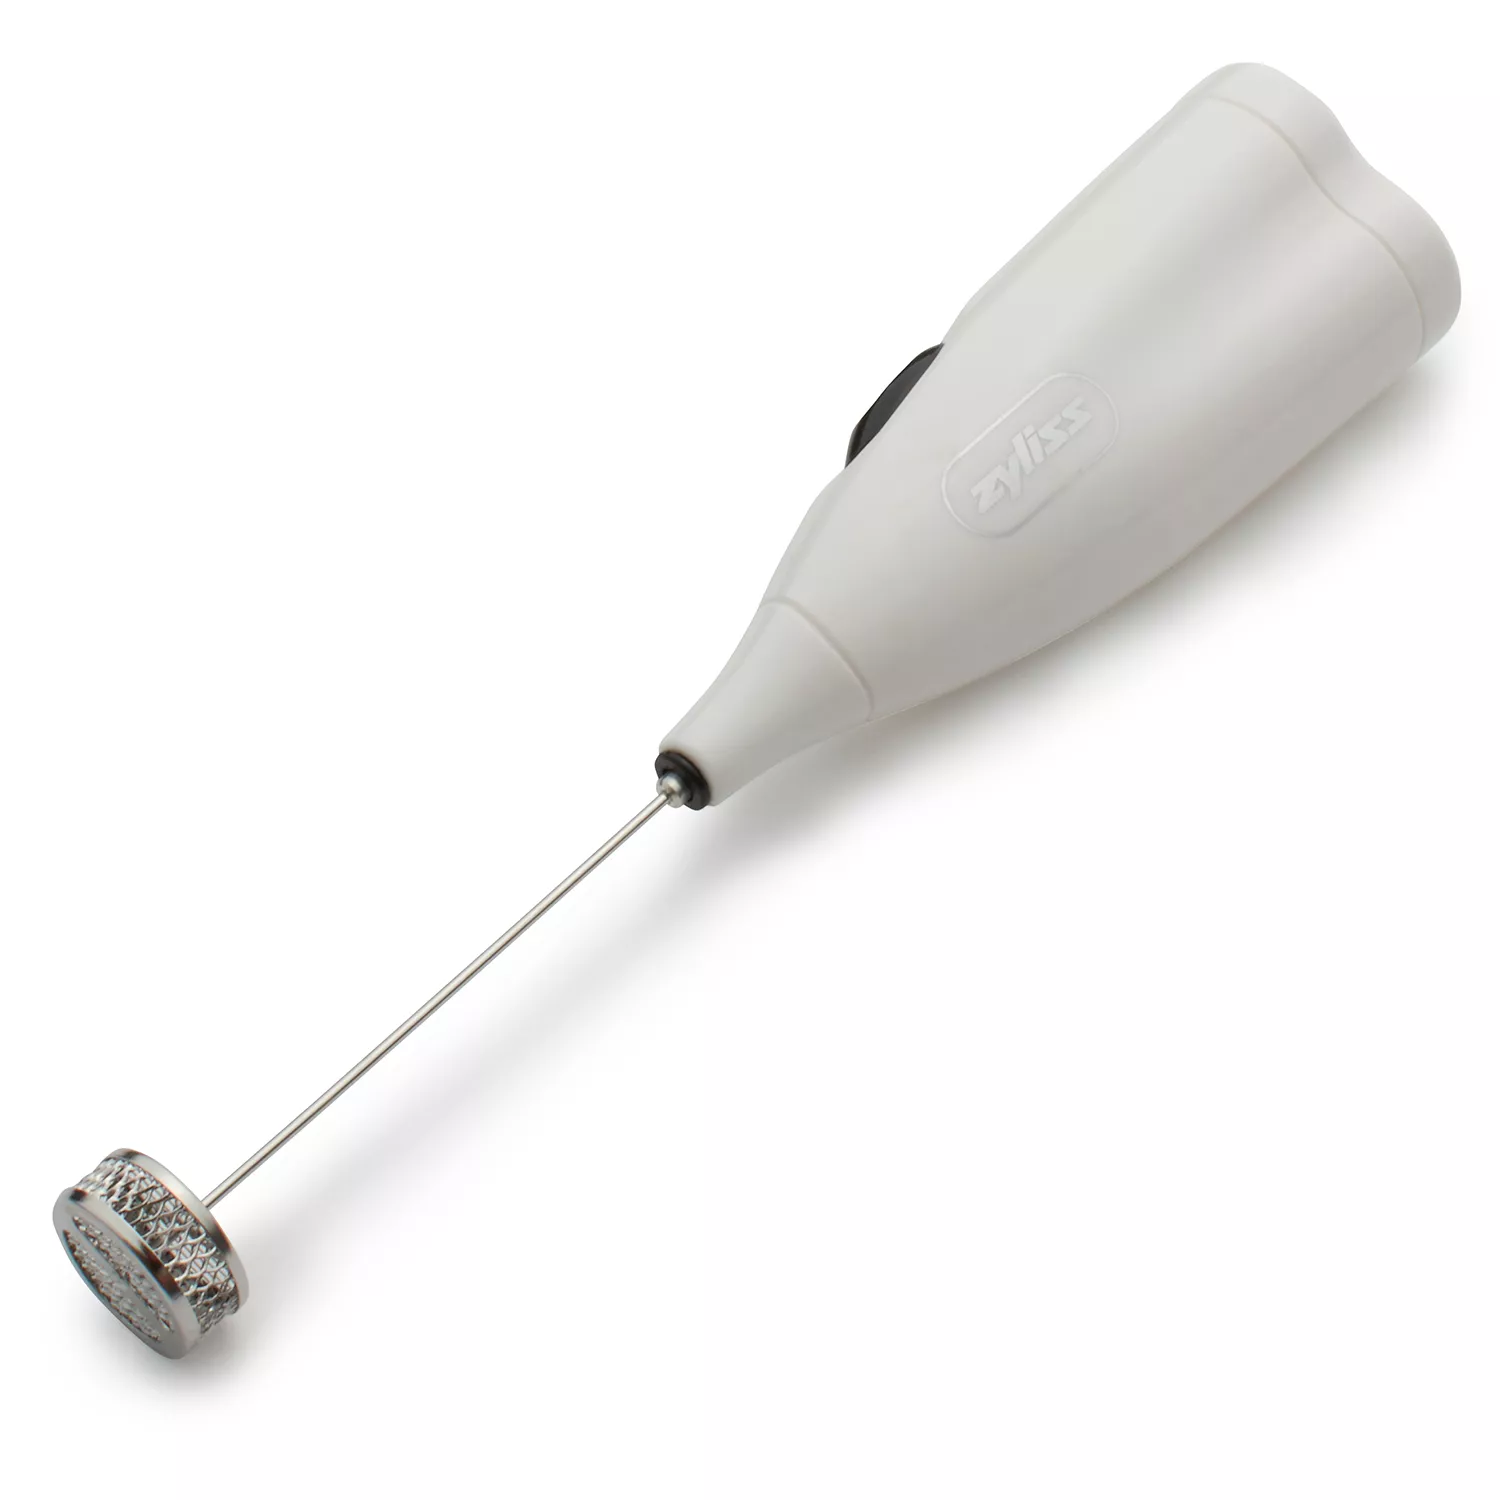 ZYLISS QUICK MILK FROTHER NEW AUTHENTIC